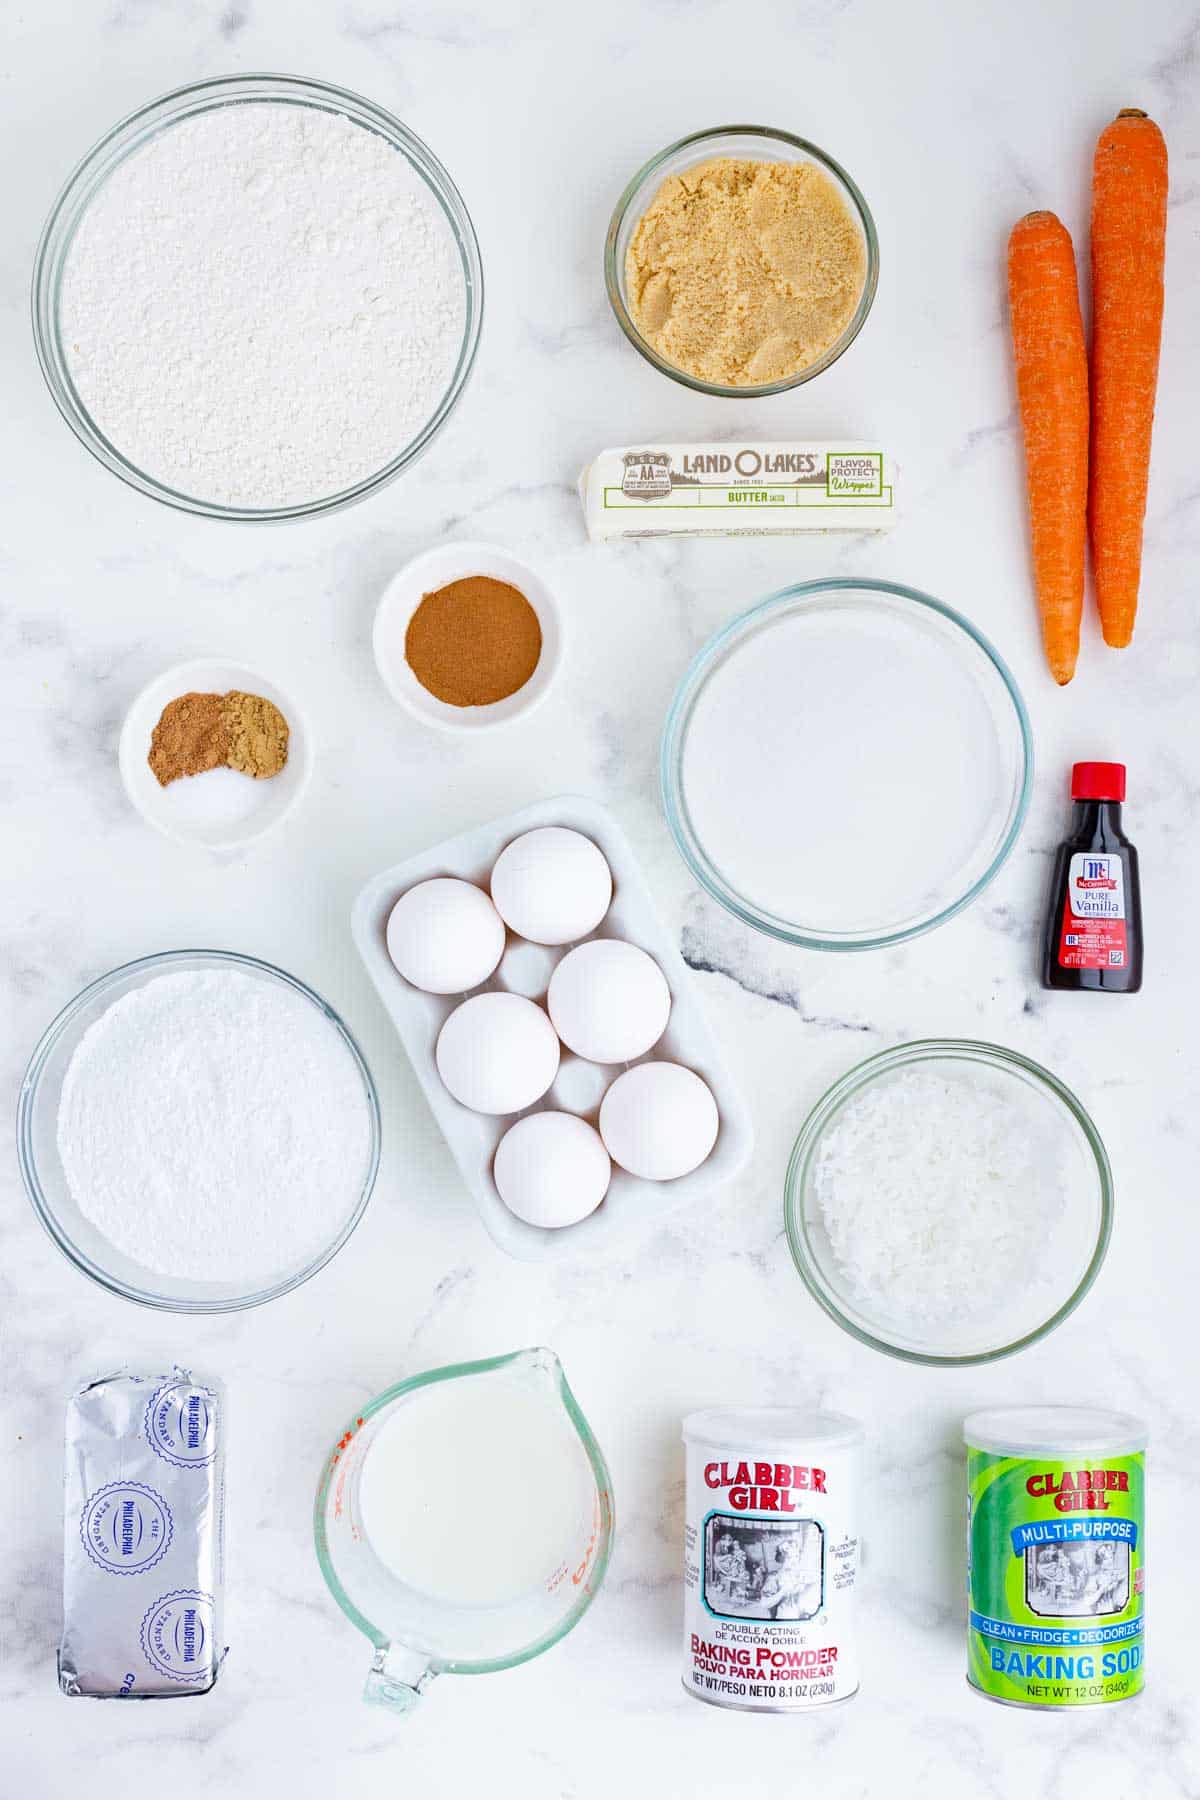 Carrots, coconut, flour, spices, butter, cream cheese, eggs, and sugar are the main ingredients for this dish.